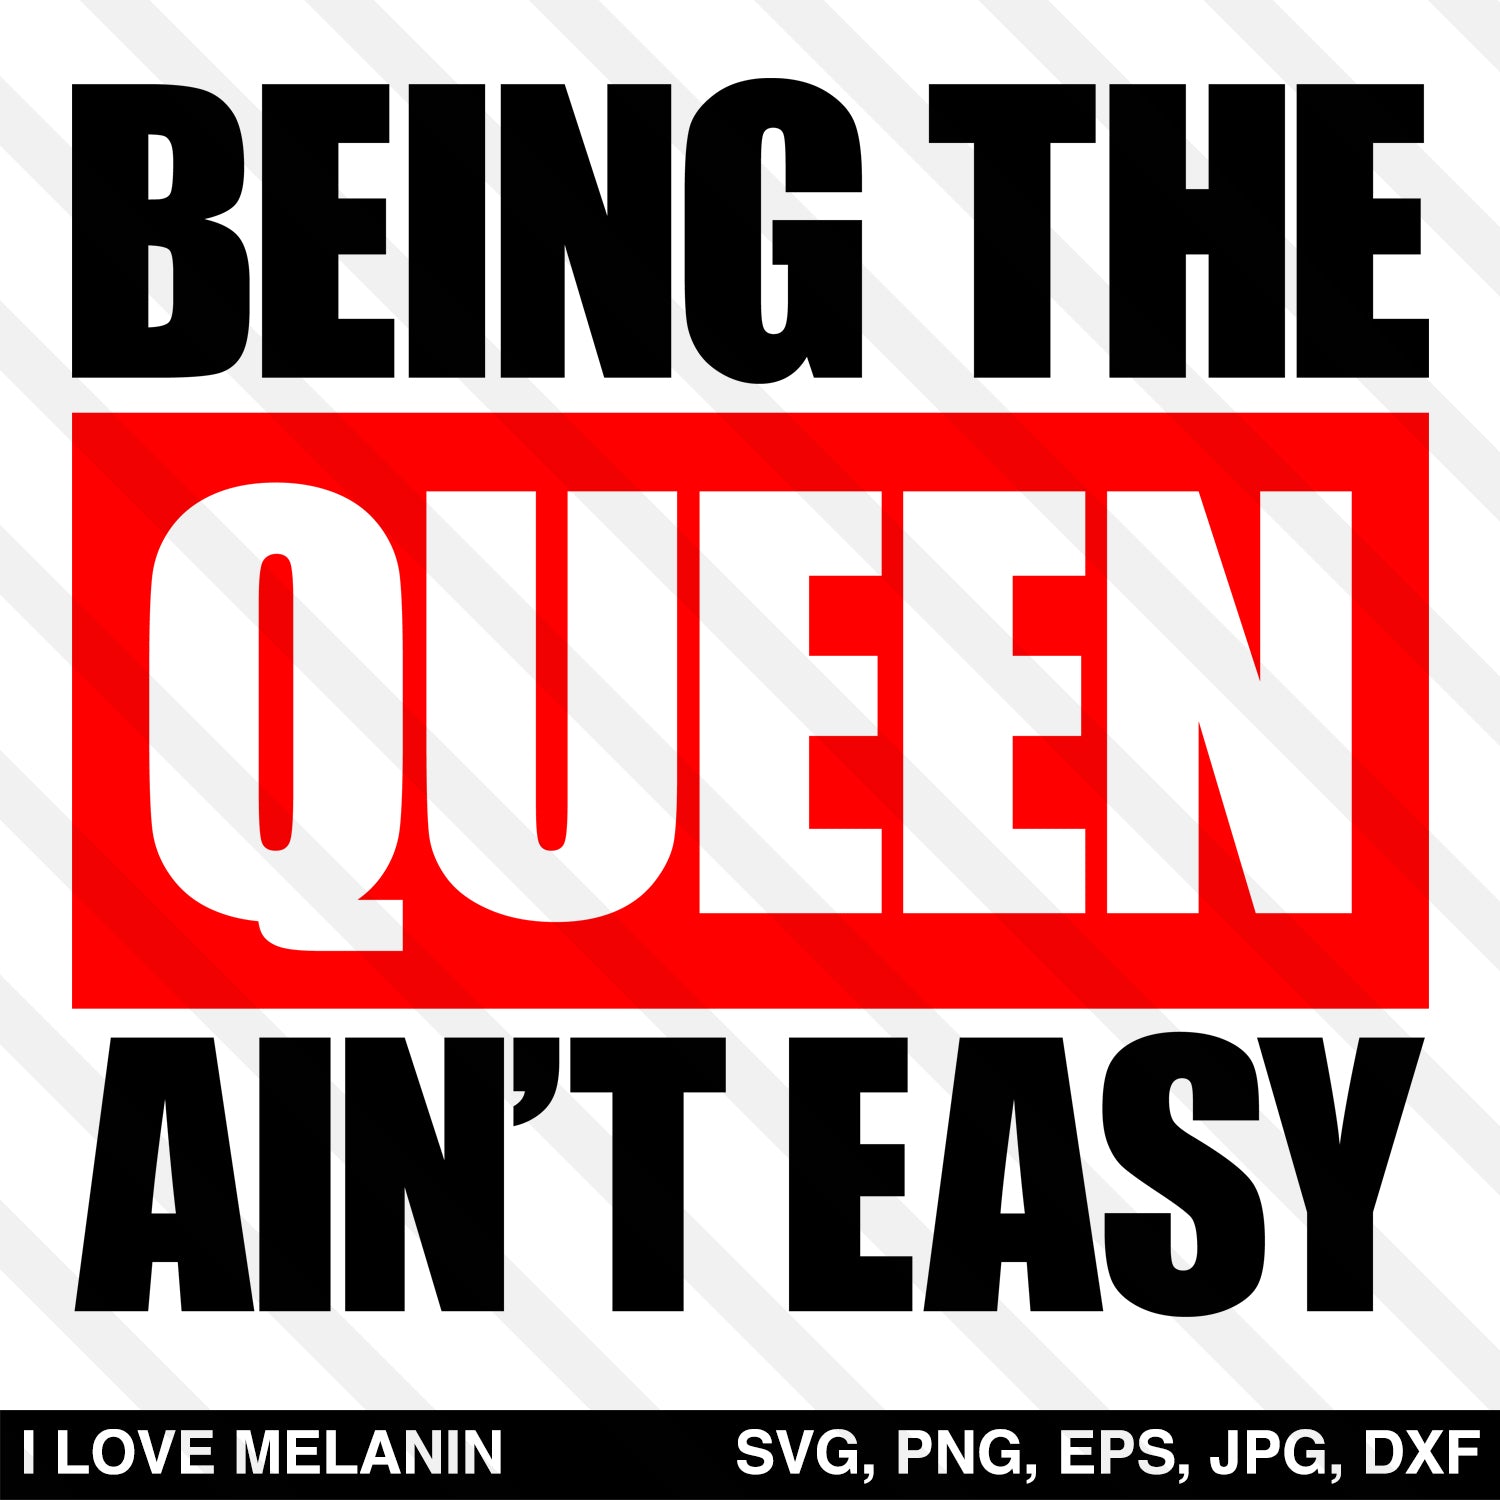 Being The Queen Ain't Easy SVG